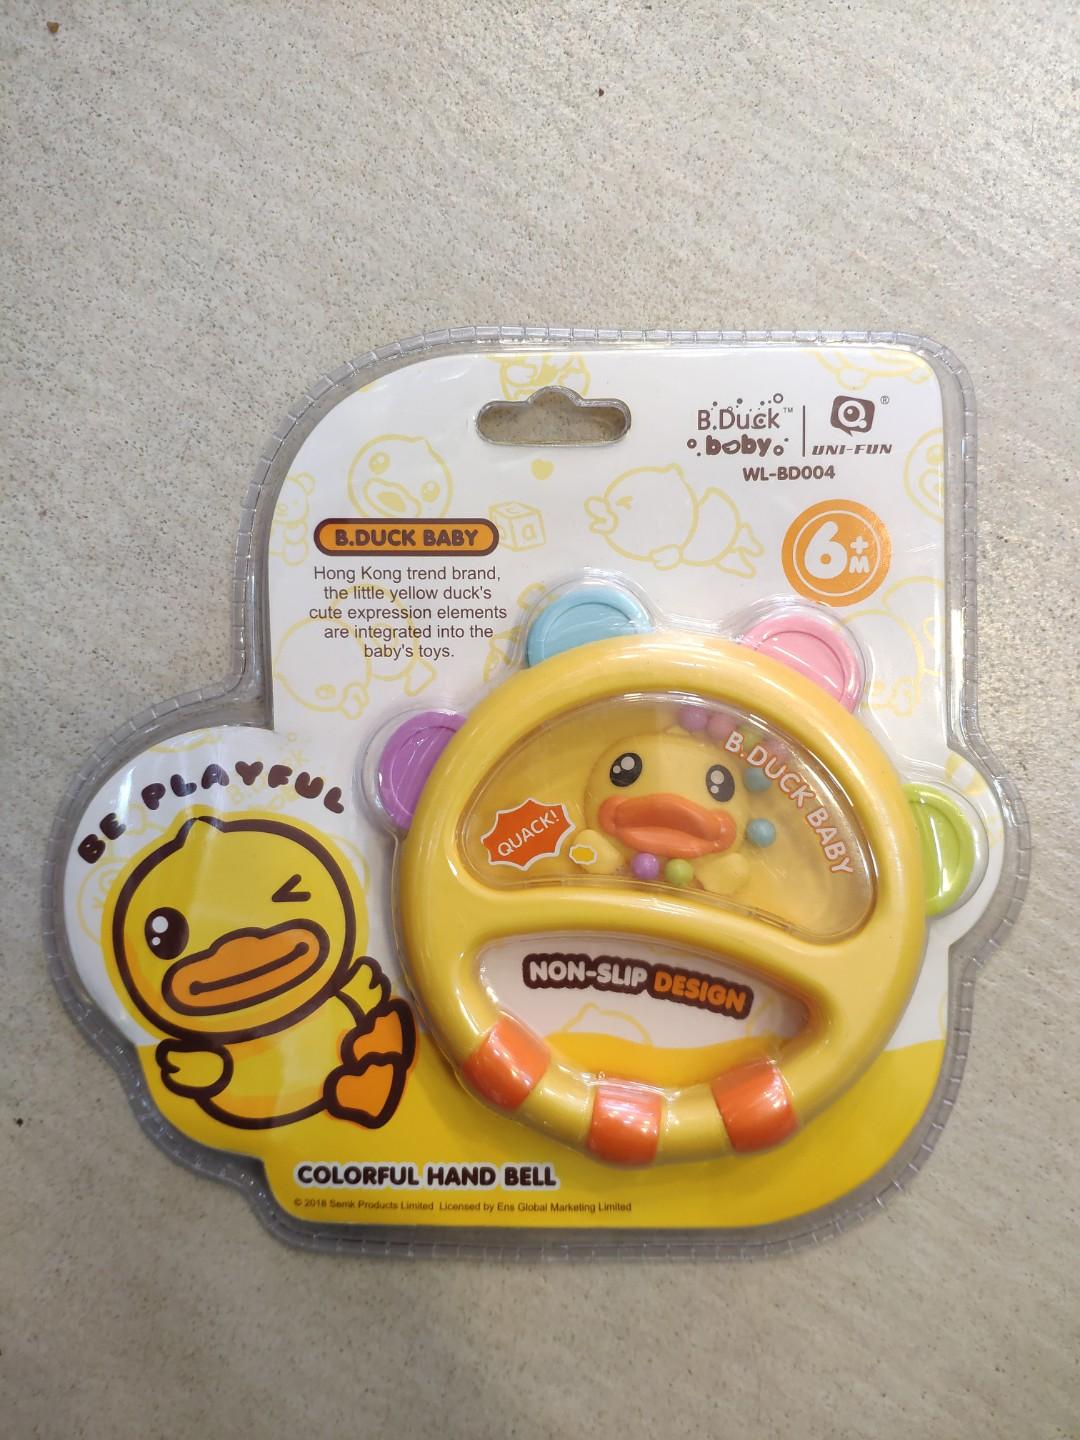 baby hand toys